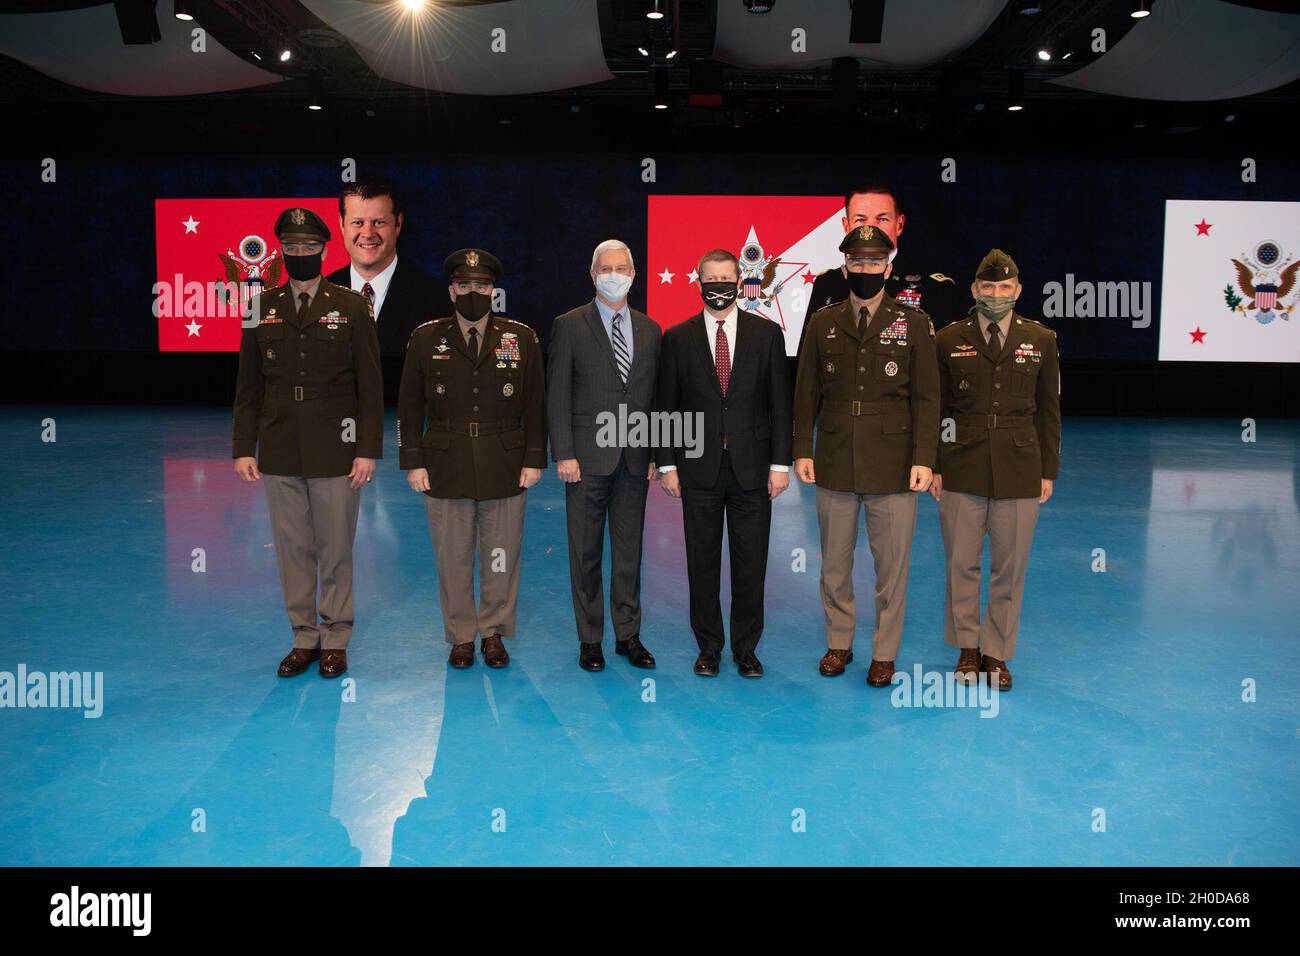 (From Left to Right) Gen. Joseph M. Martin, U.S. Army Vice Chief of Staff, Gen. Mark A. Milley, Joint Chiefs Chairman, James E. McPherson, 34th Under Secretary of the Army, Ryan D. McCarthy, 24th Secretary of the Army, Gen. James C. McConville, U.S. Army Chief of Staff, and Michael A. Grinston, Sergeant Major of the Army, pose for group photo at Comny Hall, Joint Base Myer–Henderson Hall, VA., Jan. 29, 2021. Stock Photo